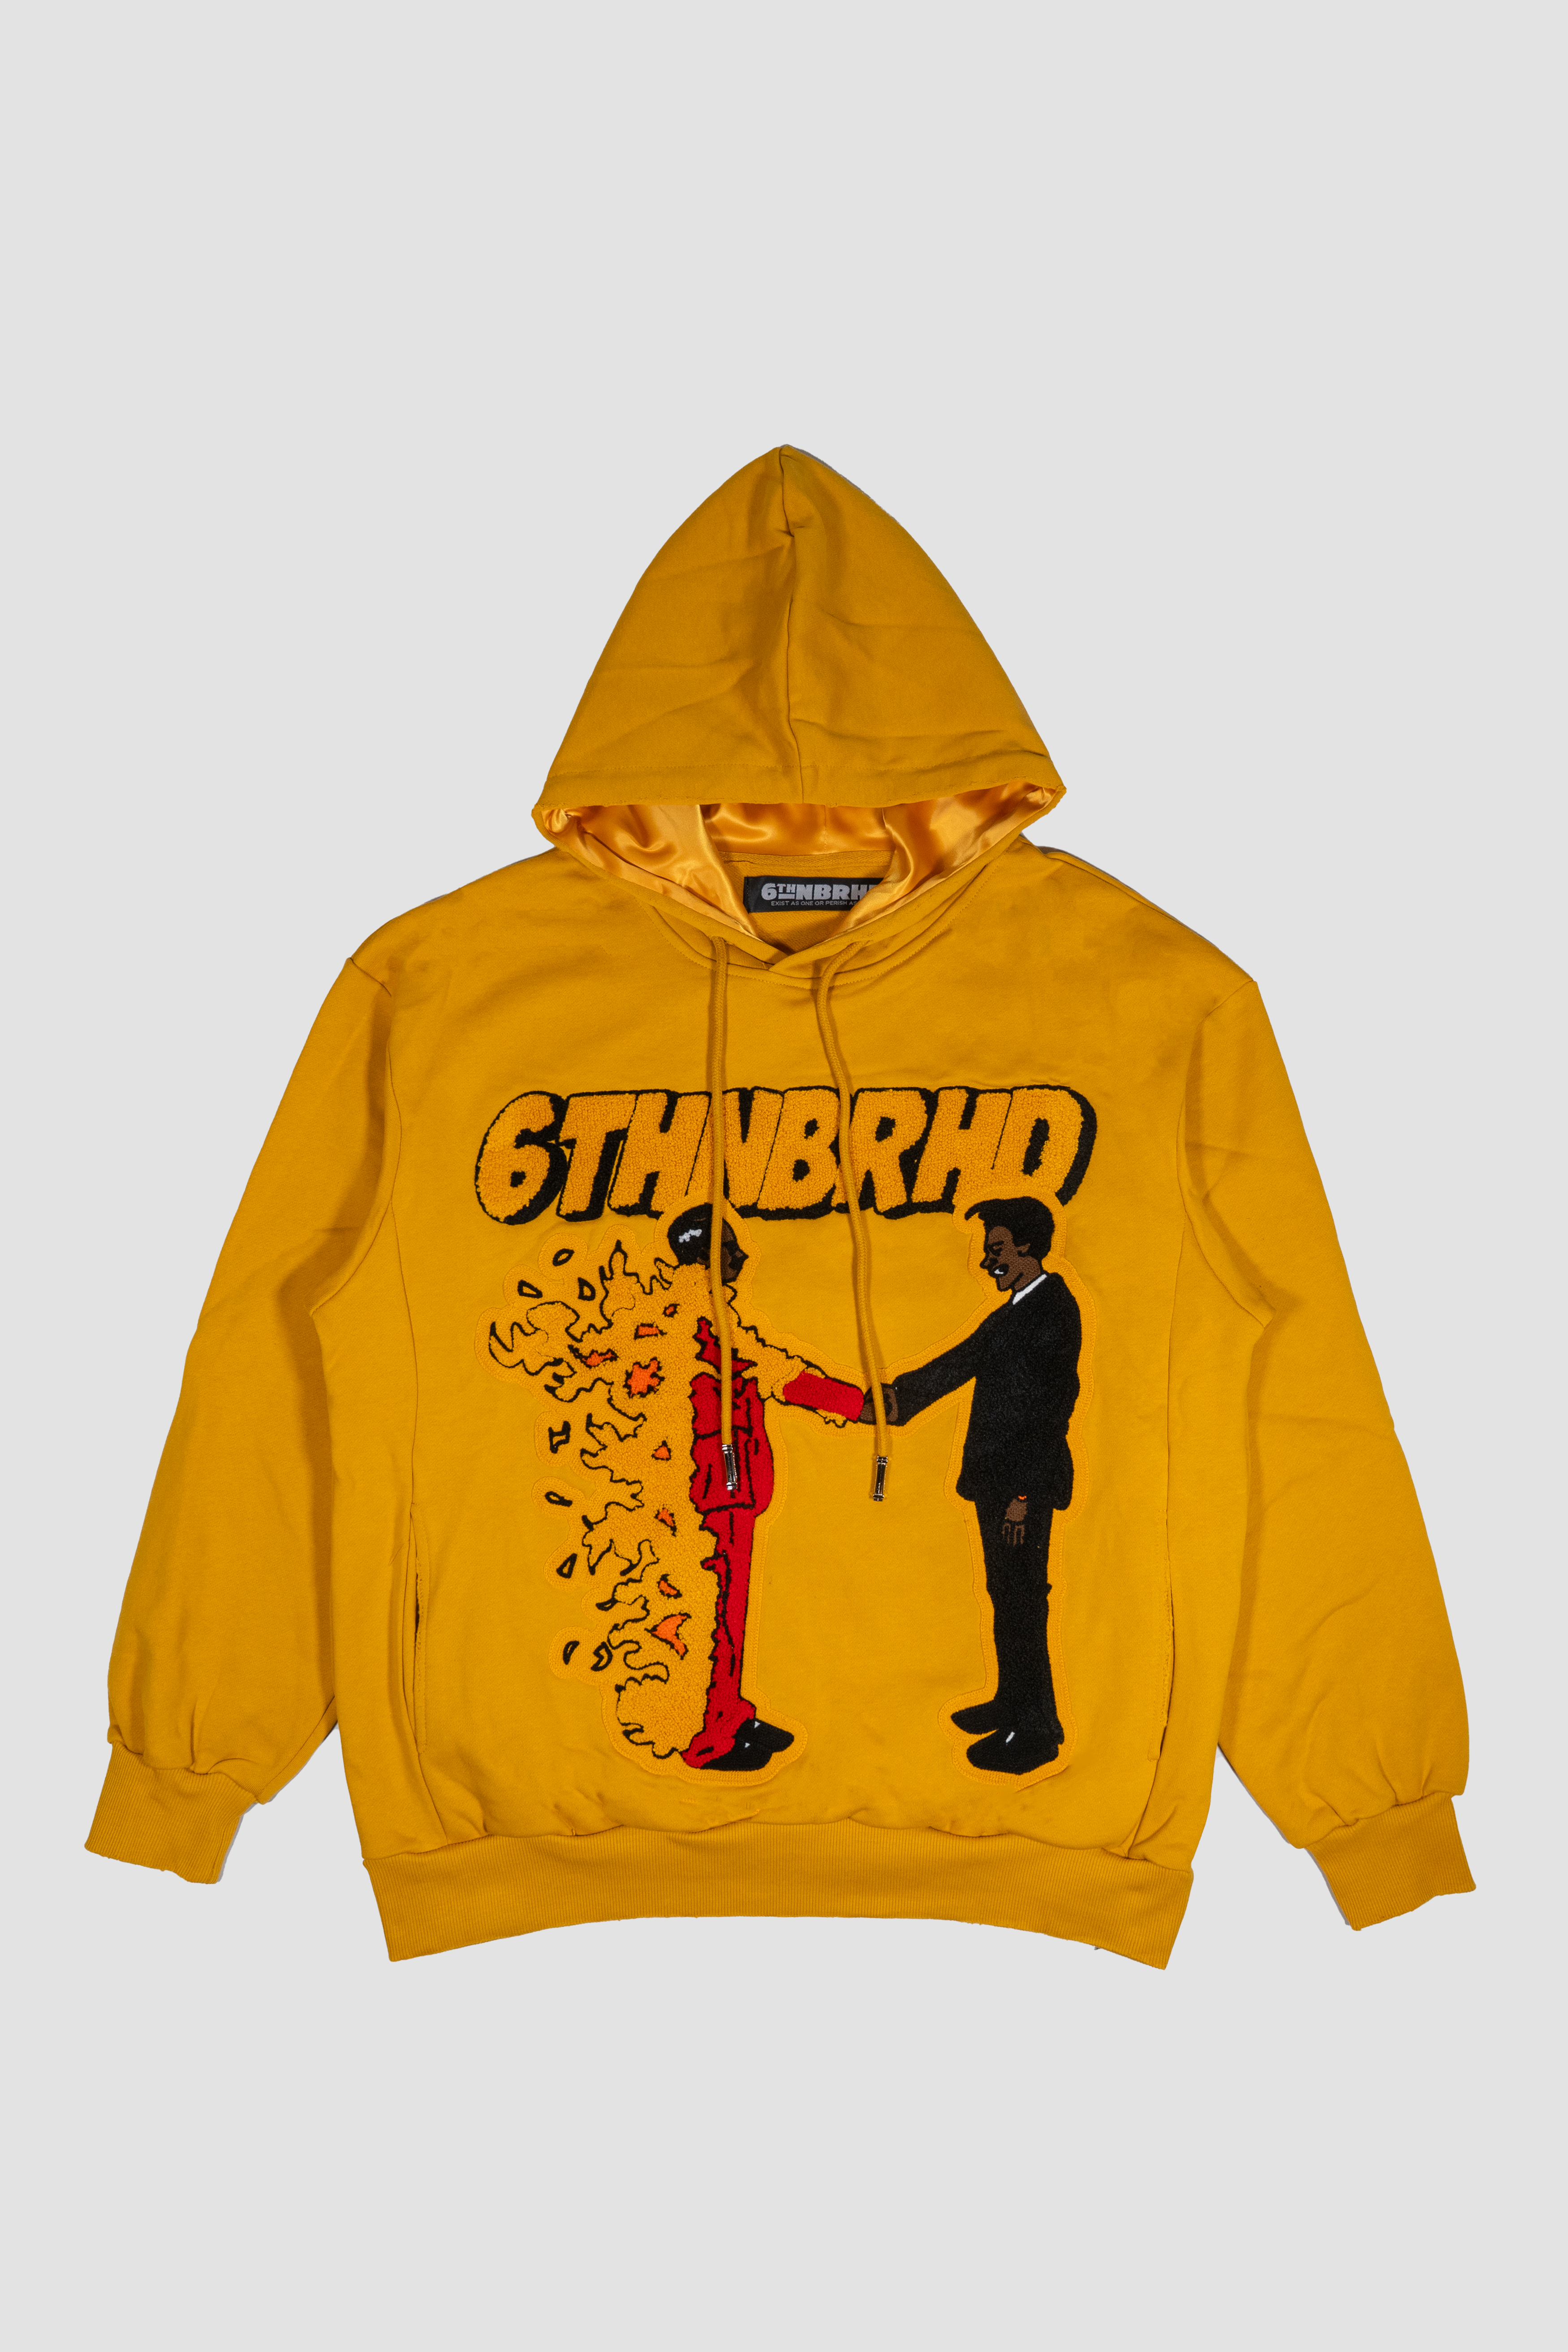 6thNBRHD PULLOVER "TWO SIDES" YELLOW